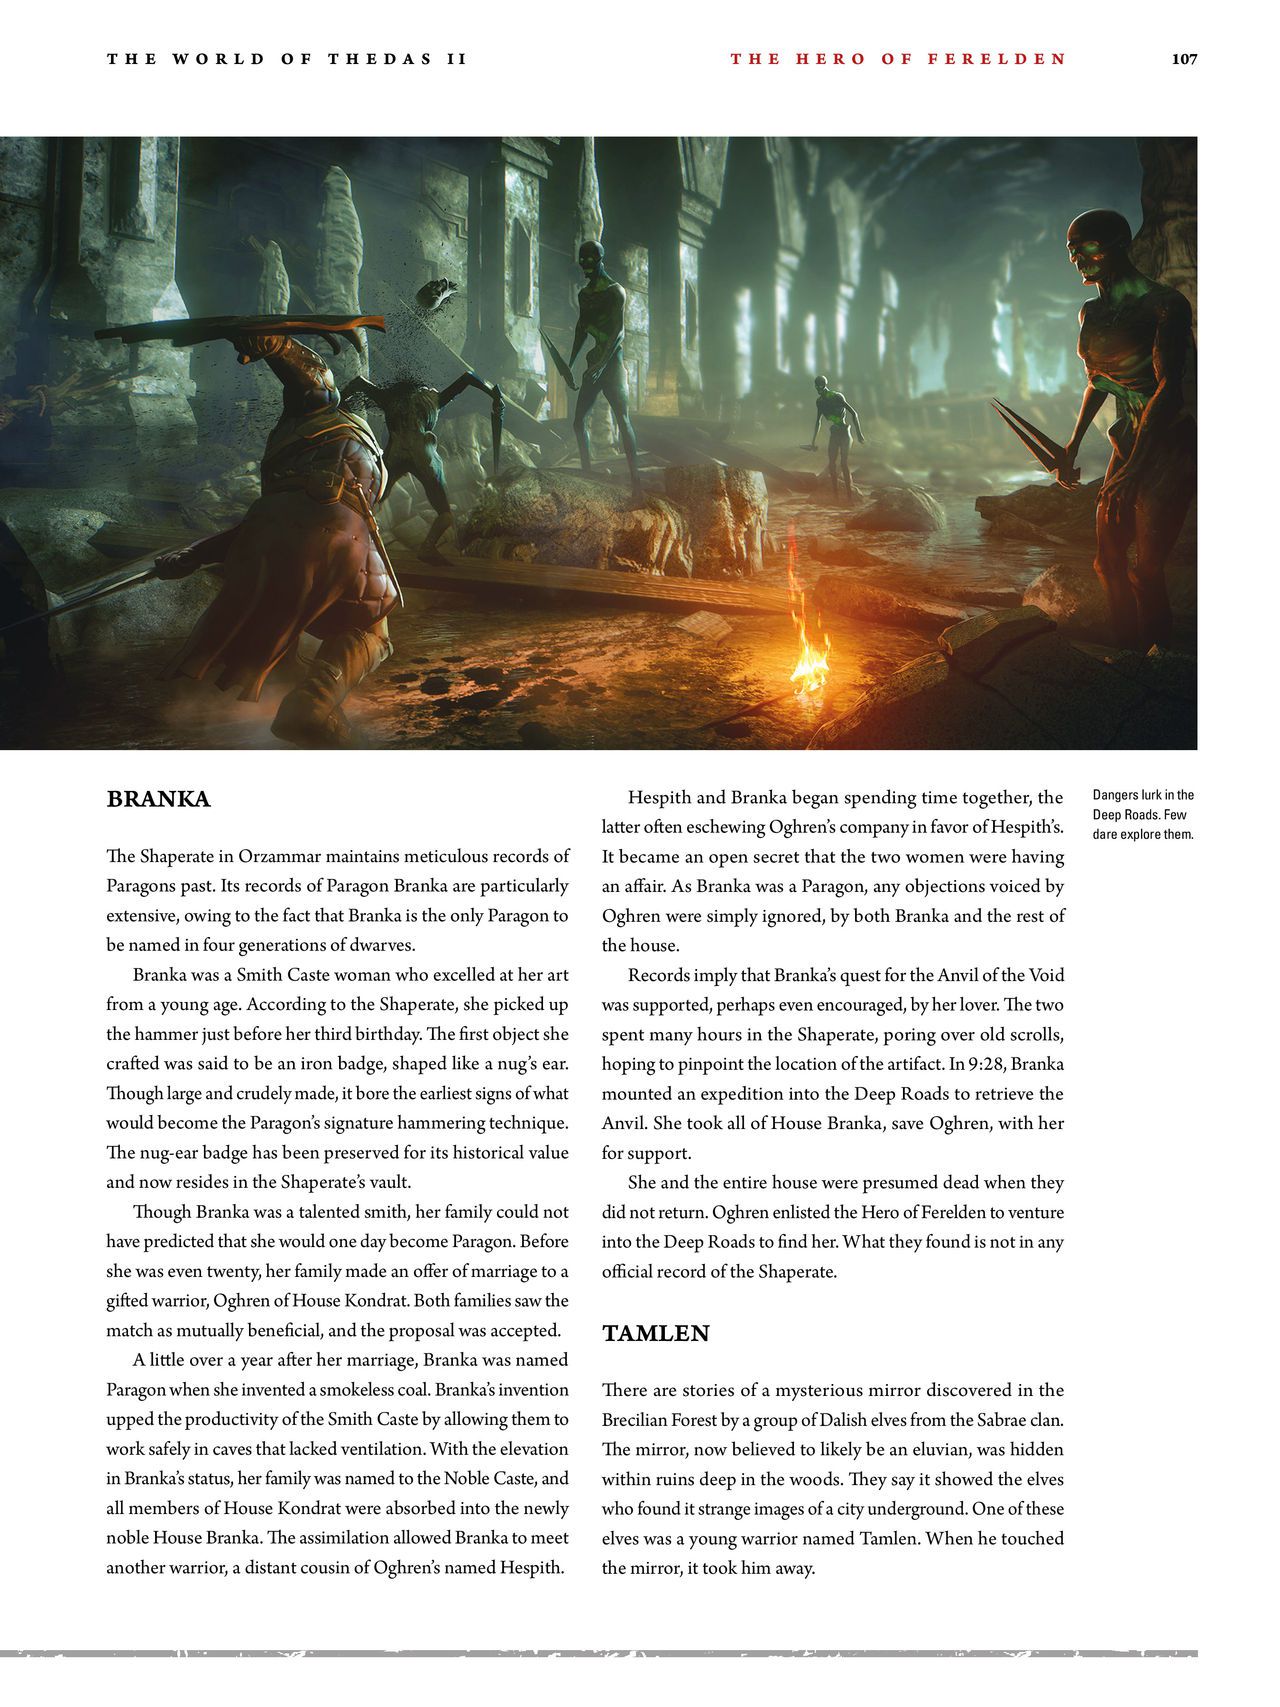 Dragon Age - The World of Thedas v02 103